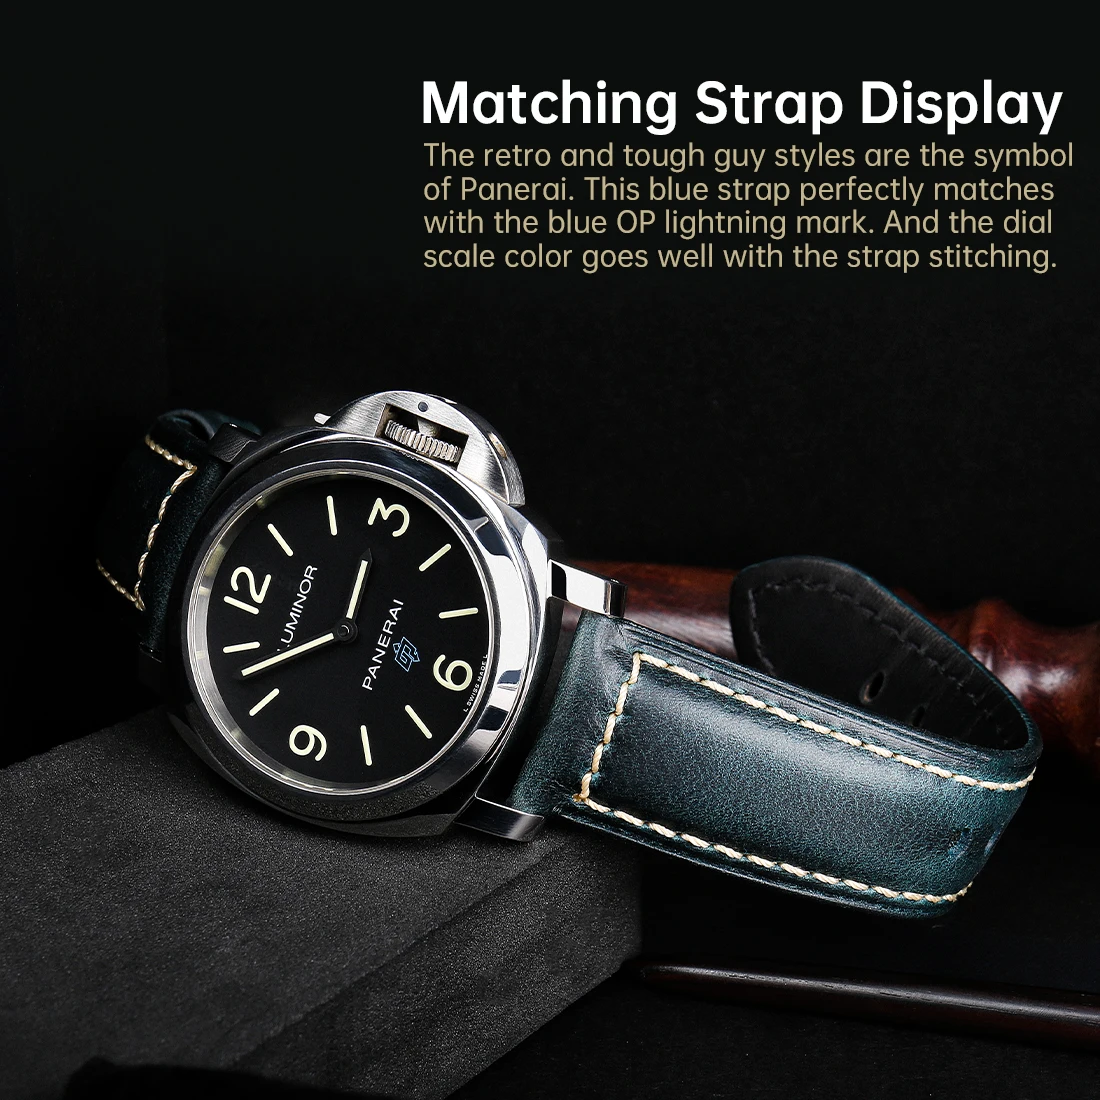 MAIKES Watch Strap Bracelet Watch Accessories 20mm 22mm 24mm Vintage Cow Leather Watch Band For Panerai Fossil Watchband 5